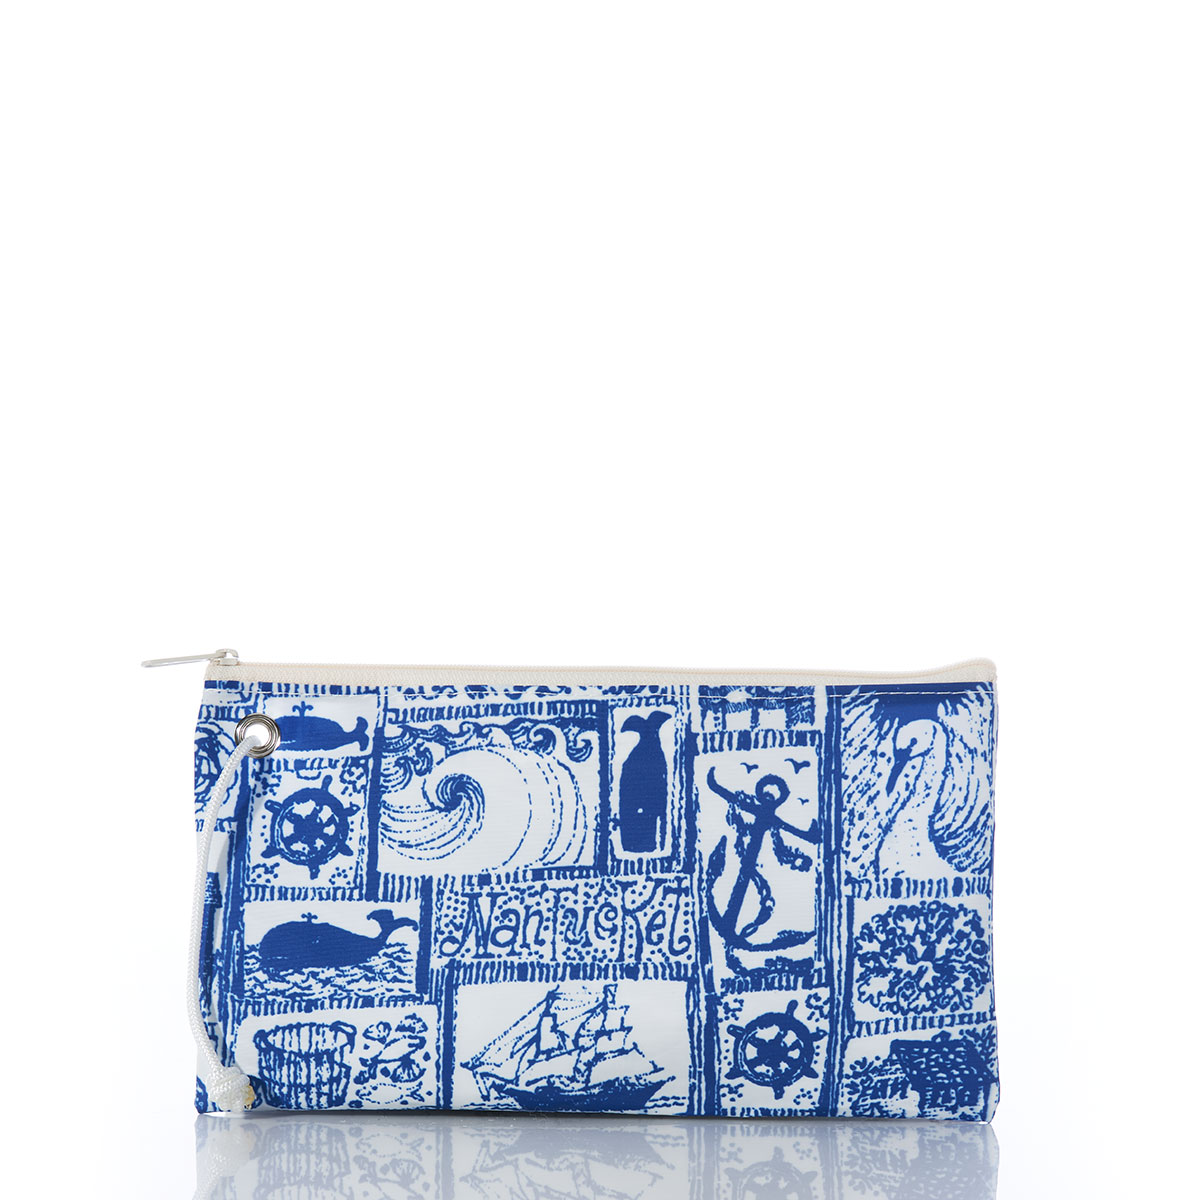 back view of blue squares filled with various nautical imagery printed on recycled sail cloth large wristlet with white zipper and wristlet strap